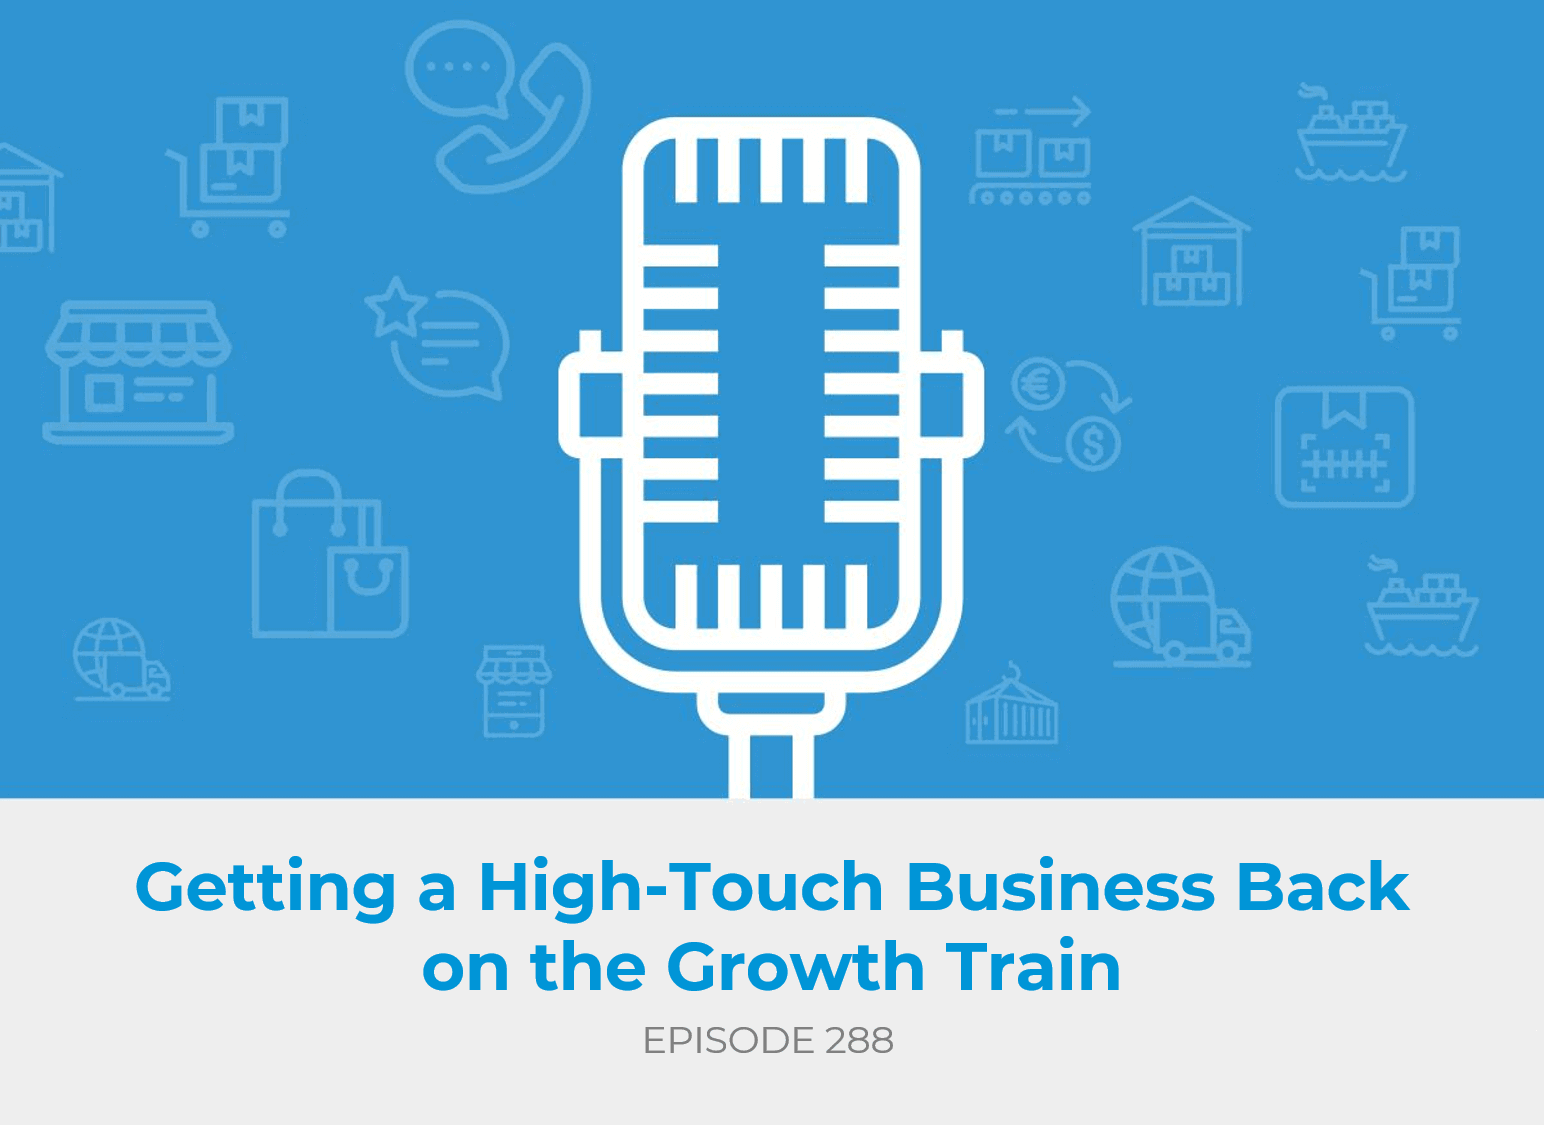 Getting a High-Touch Business Back on the Growth Train